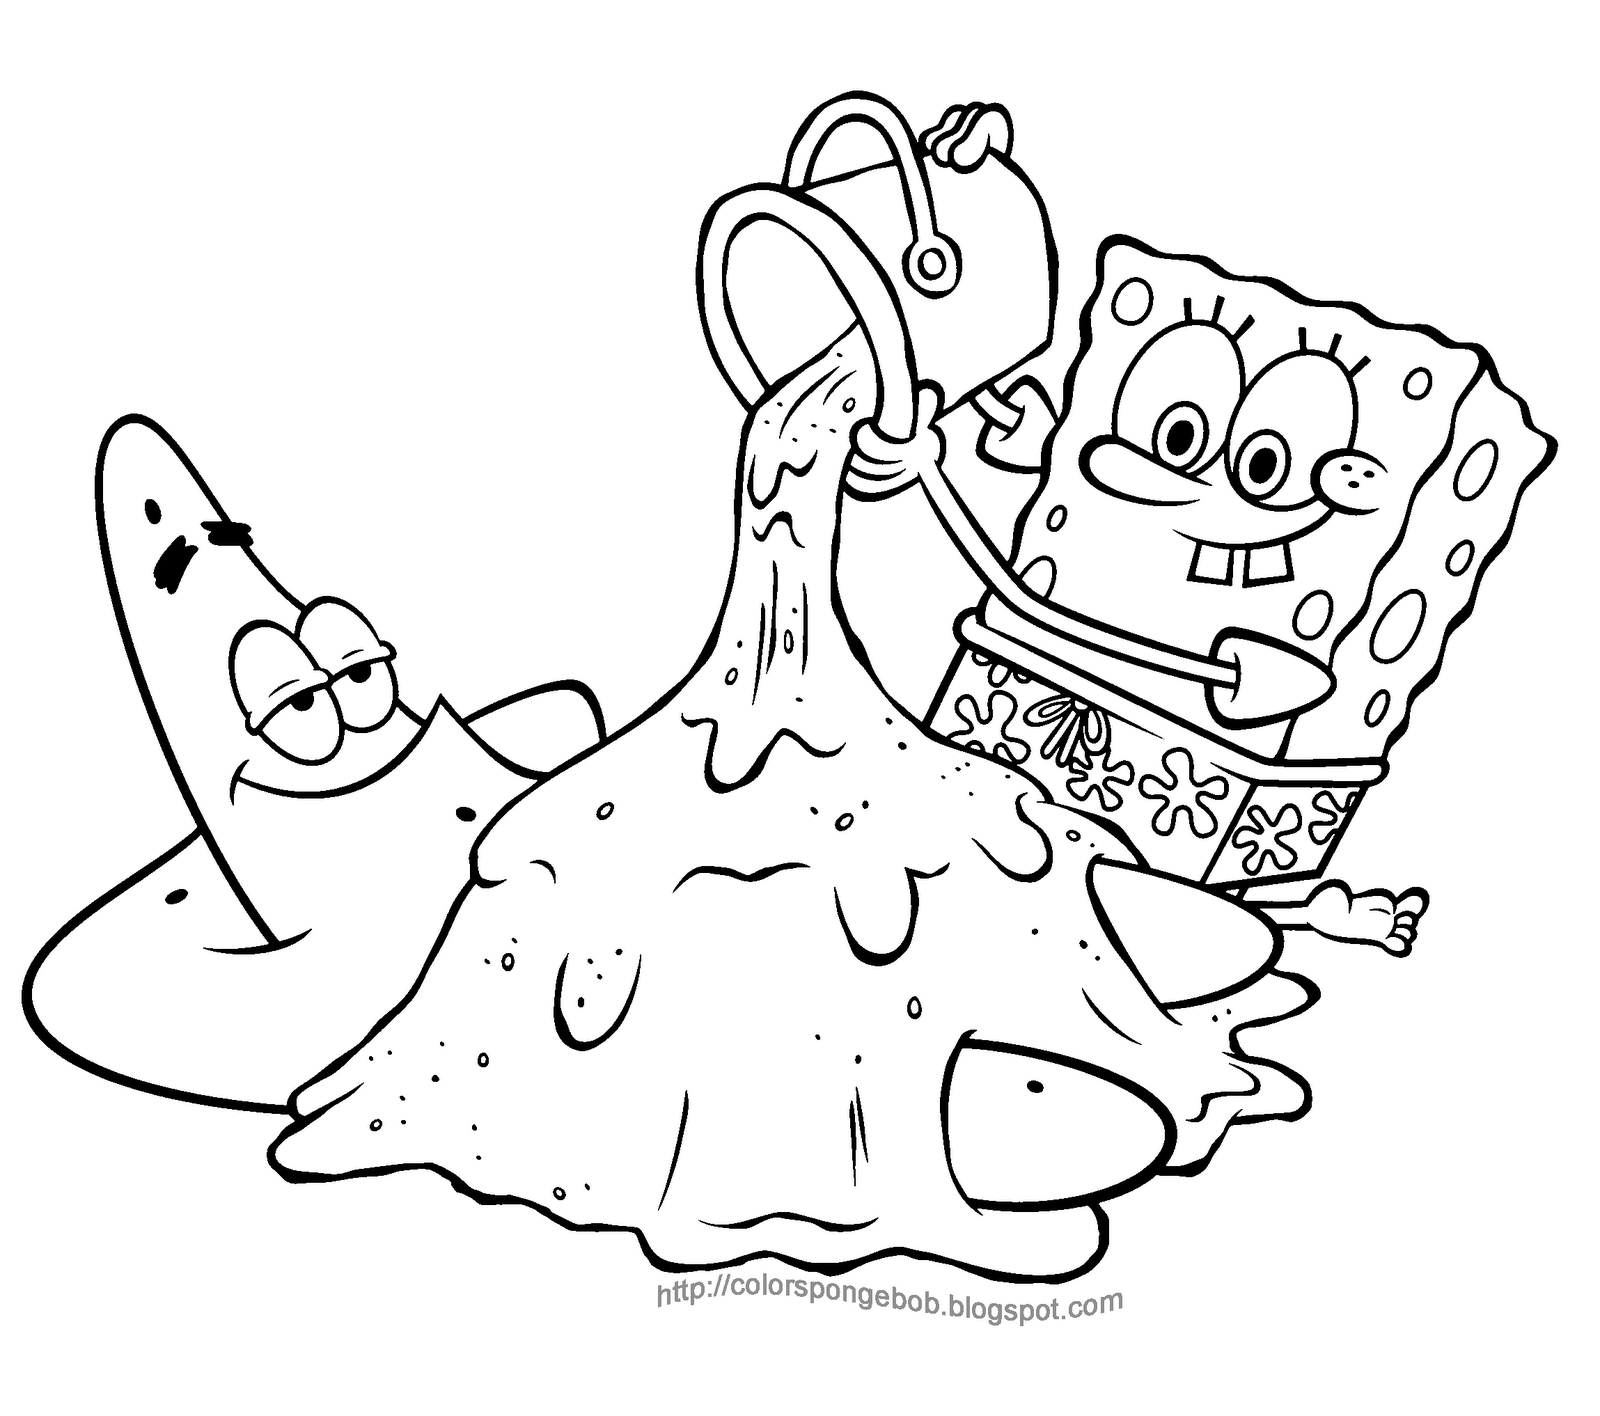 Kids Coloring Pages Spongebob Coloring Pages Effy Moom Free Coloring Picture wallpaper give a chance to color on the wall without getting in trouble! Fill the walls of your home or office with stress-relieving [effymoom.blogspot.com]